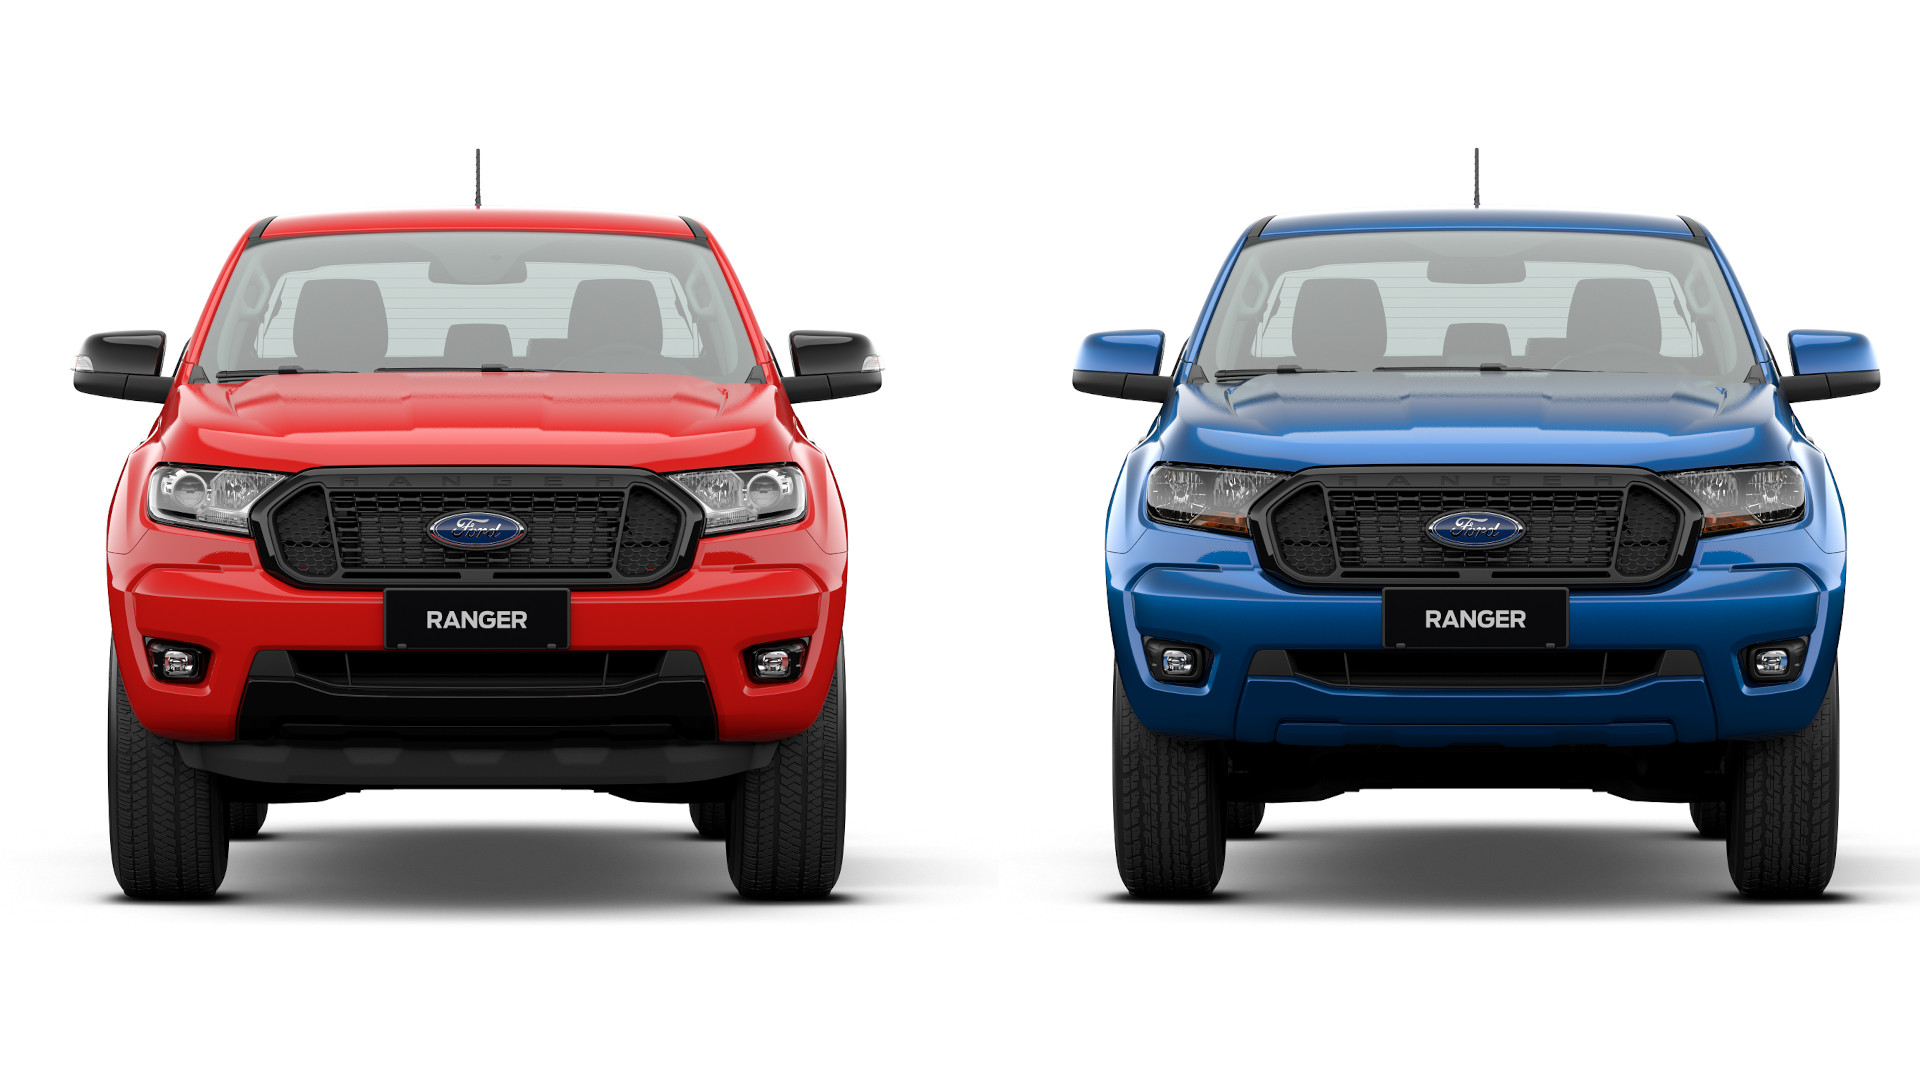 Ford PH launches refreshed Ranger XLS, XLT, and Wildtrak variants